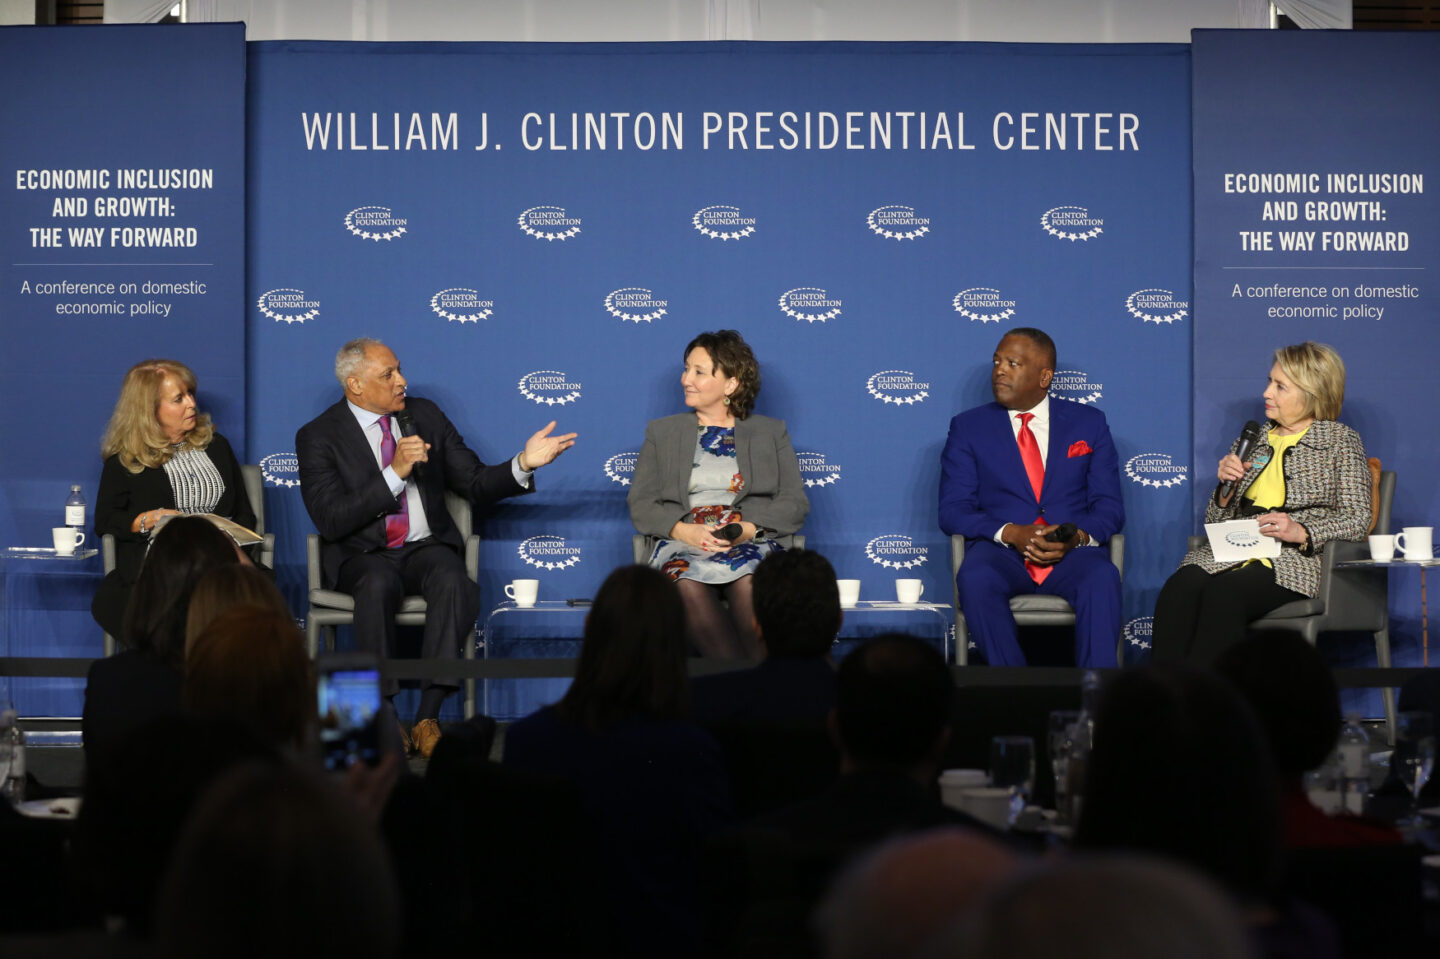 Secretary Clinton and others participate in a panel discussion